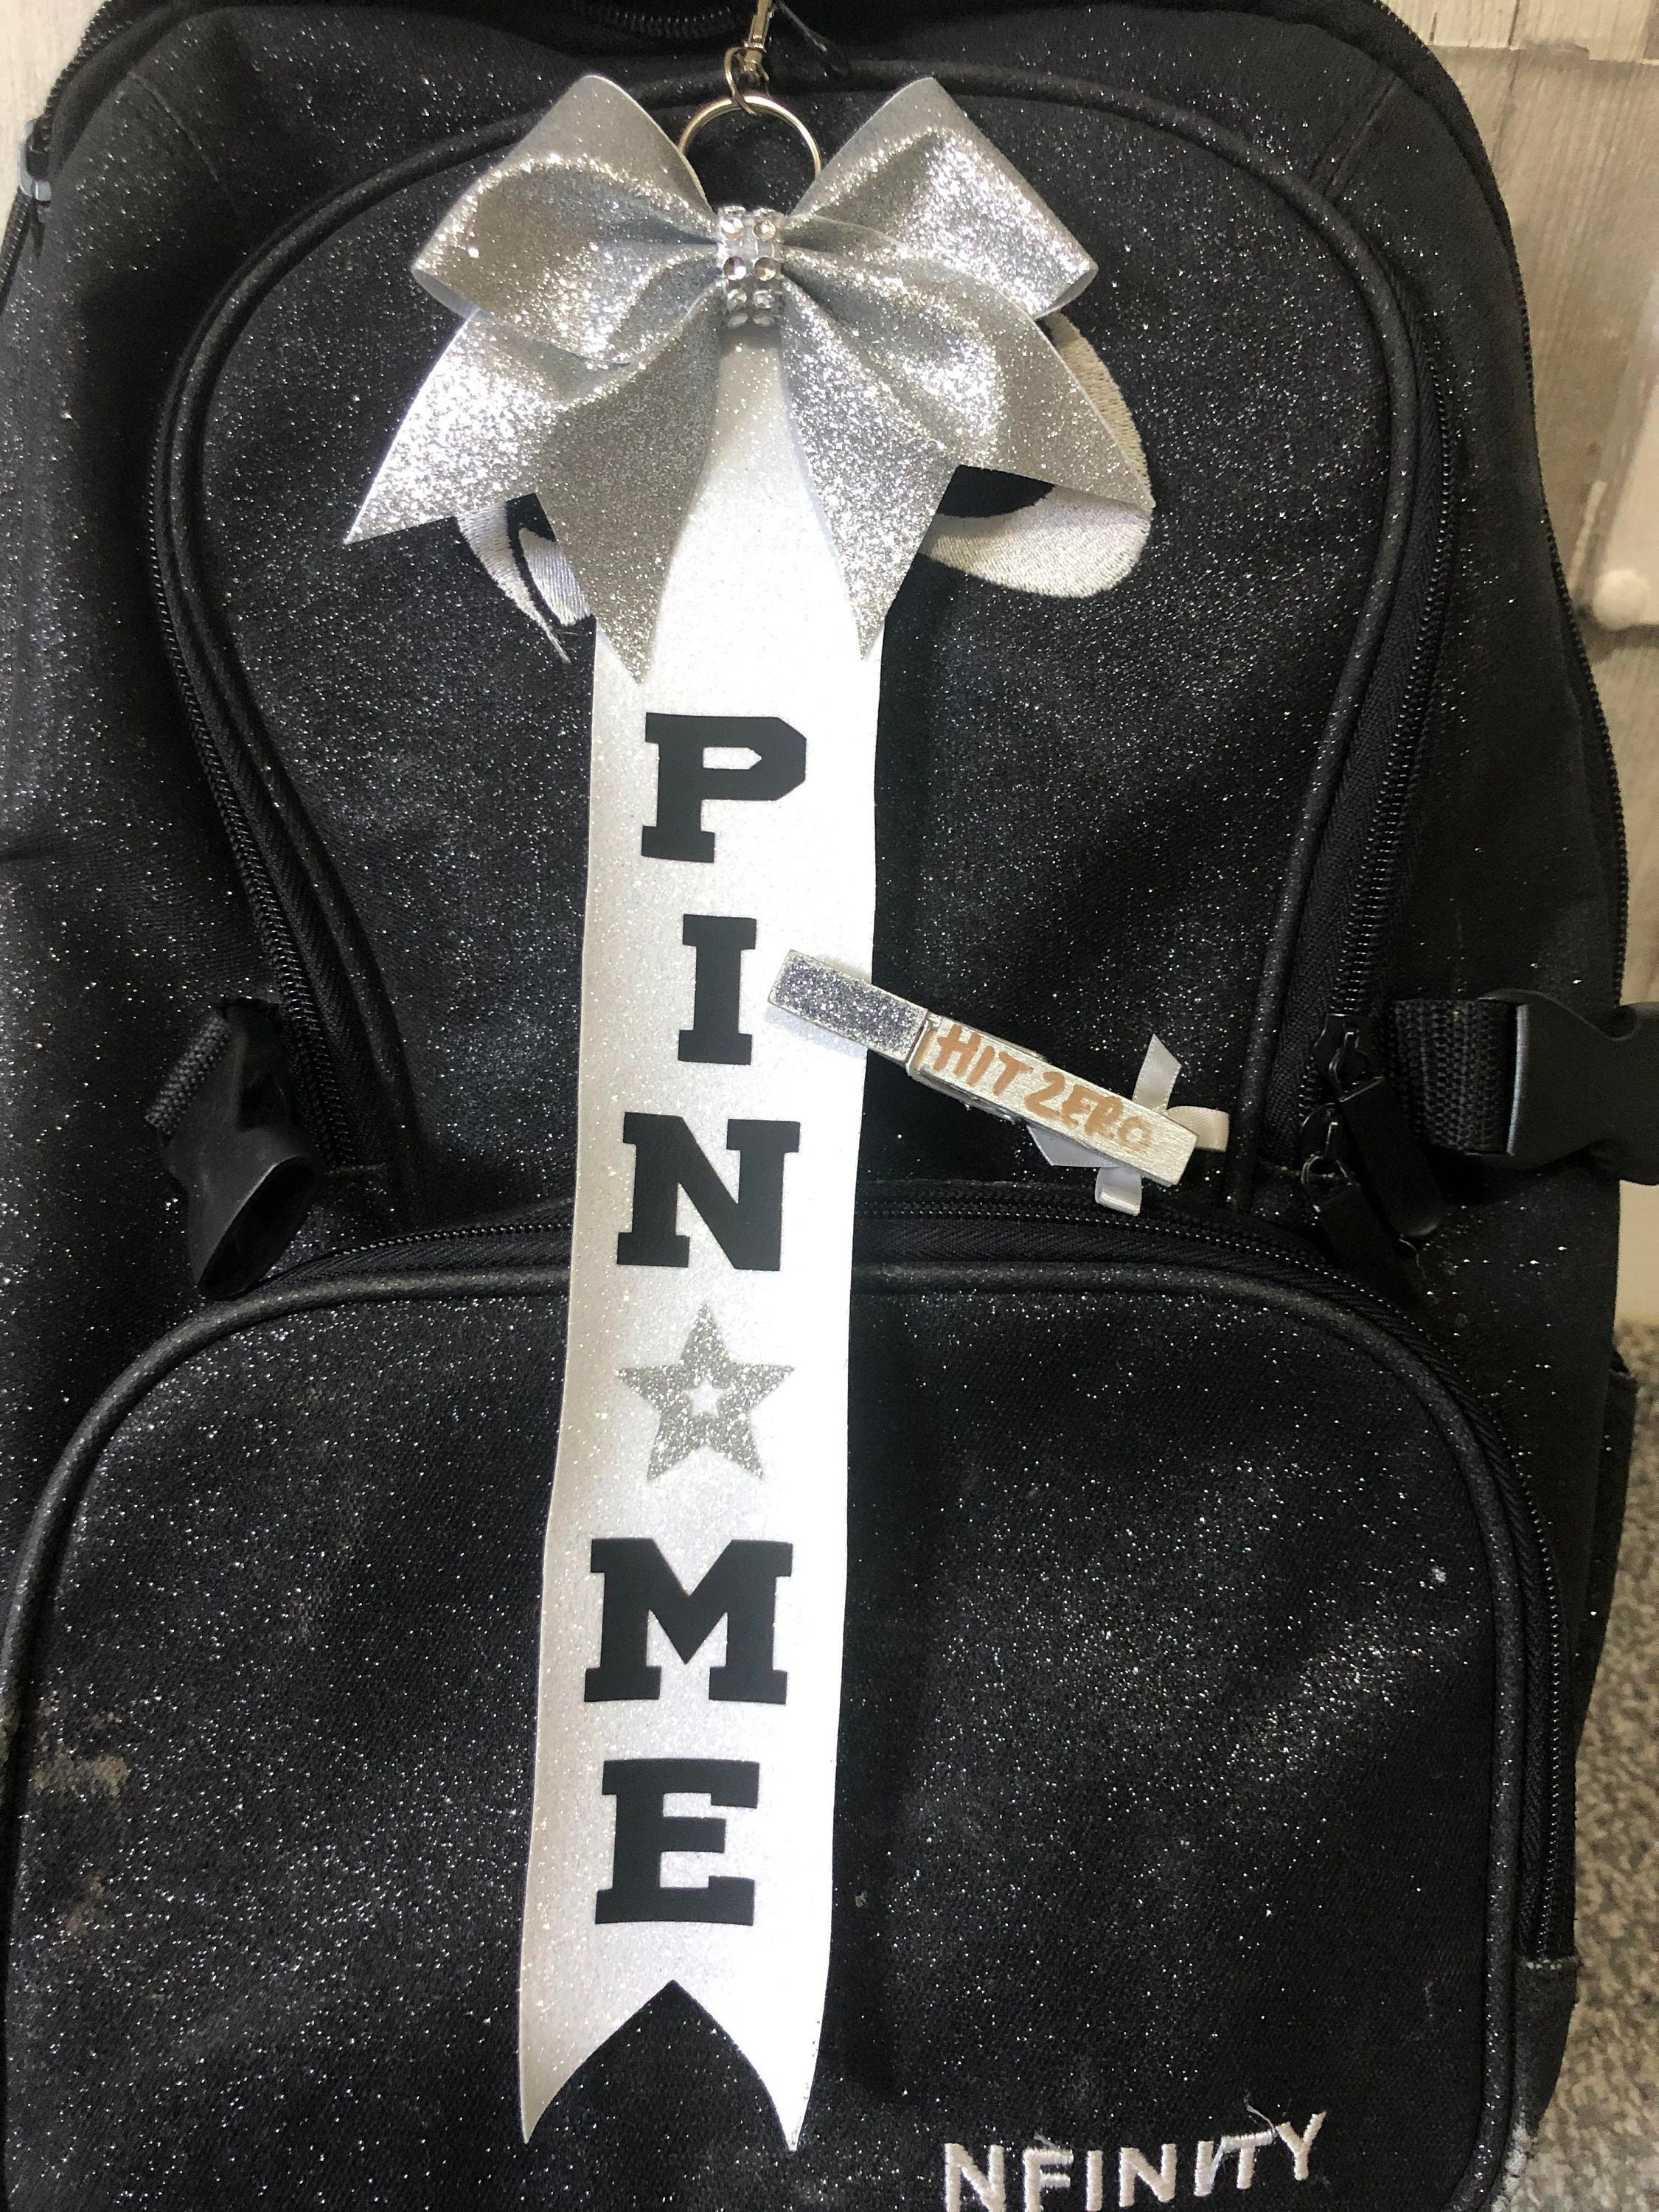 Pin Me Cheer Ribbon, Pin Me Comp Chain, Cheerleader Gift, Pin Me,  Cheerleader Bag Charm, Cheer Bag Bow, Cheer Comp Gifts, Cheer Team Gifts 